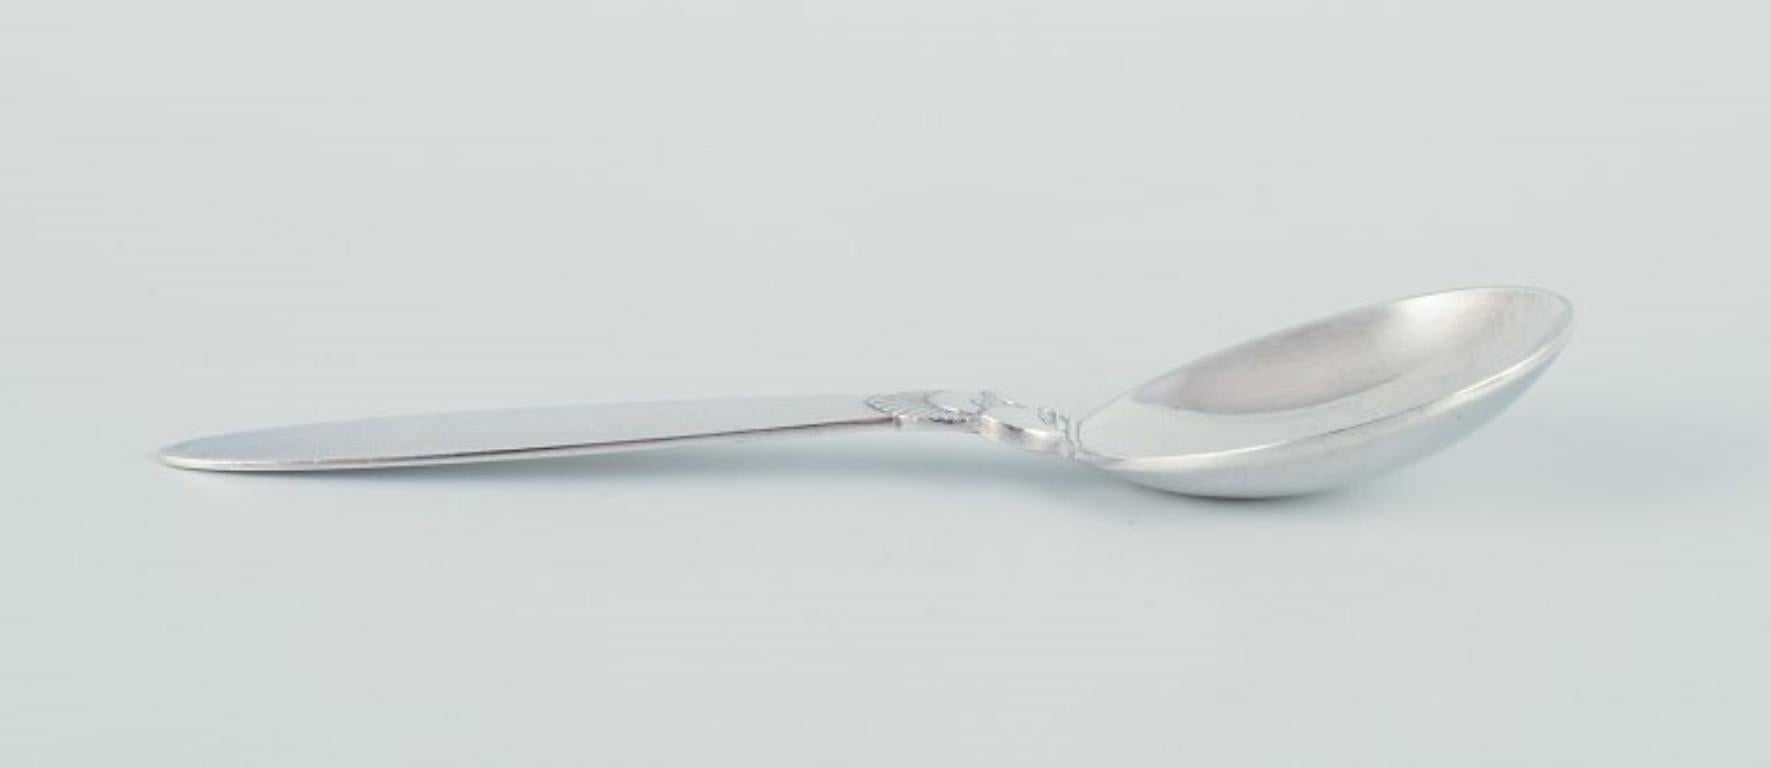 Georg Jensen Cactus. Jam spoon in sterling silver.
Hallmarked after 1944.
In perfect condition.
Dimensions: Length 13.5 cm.